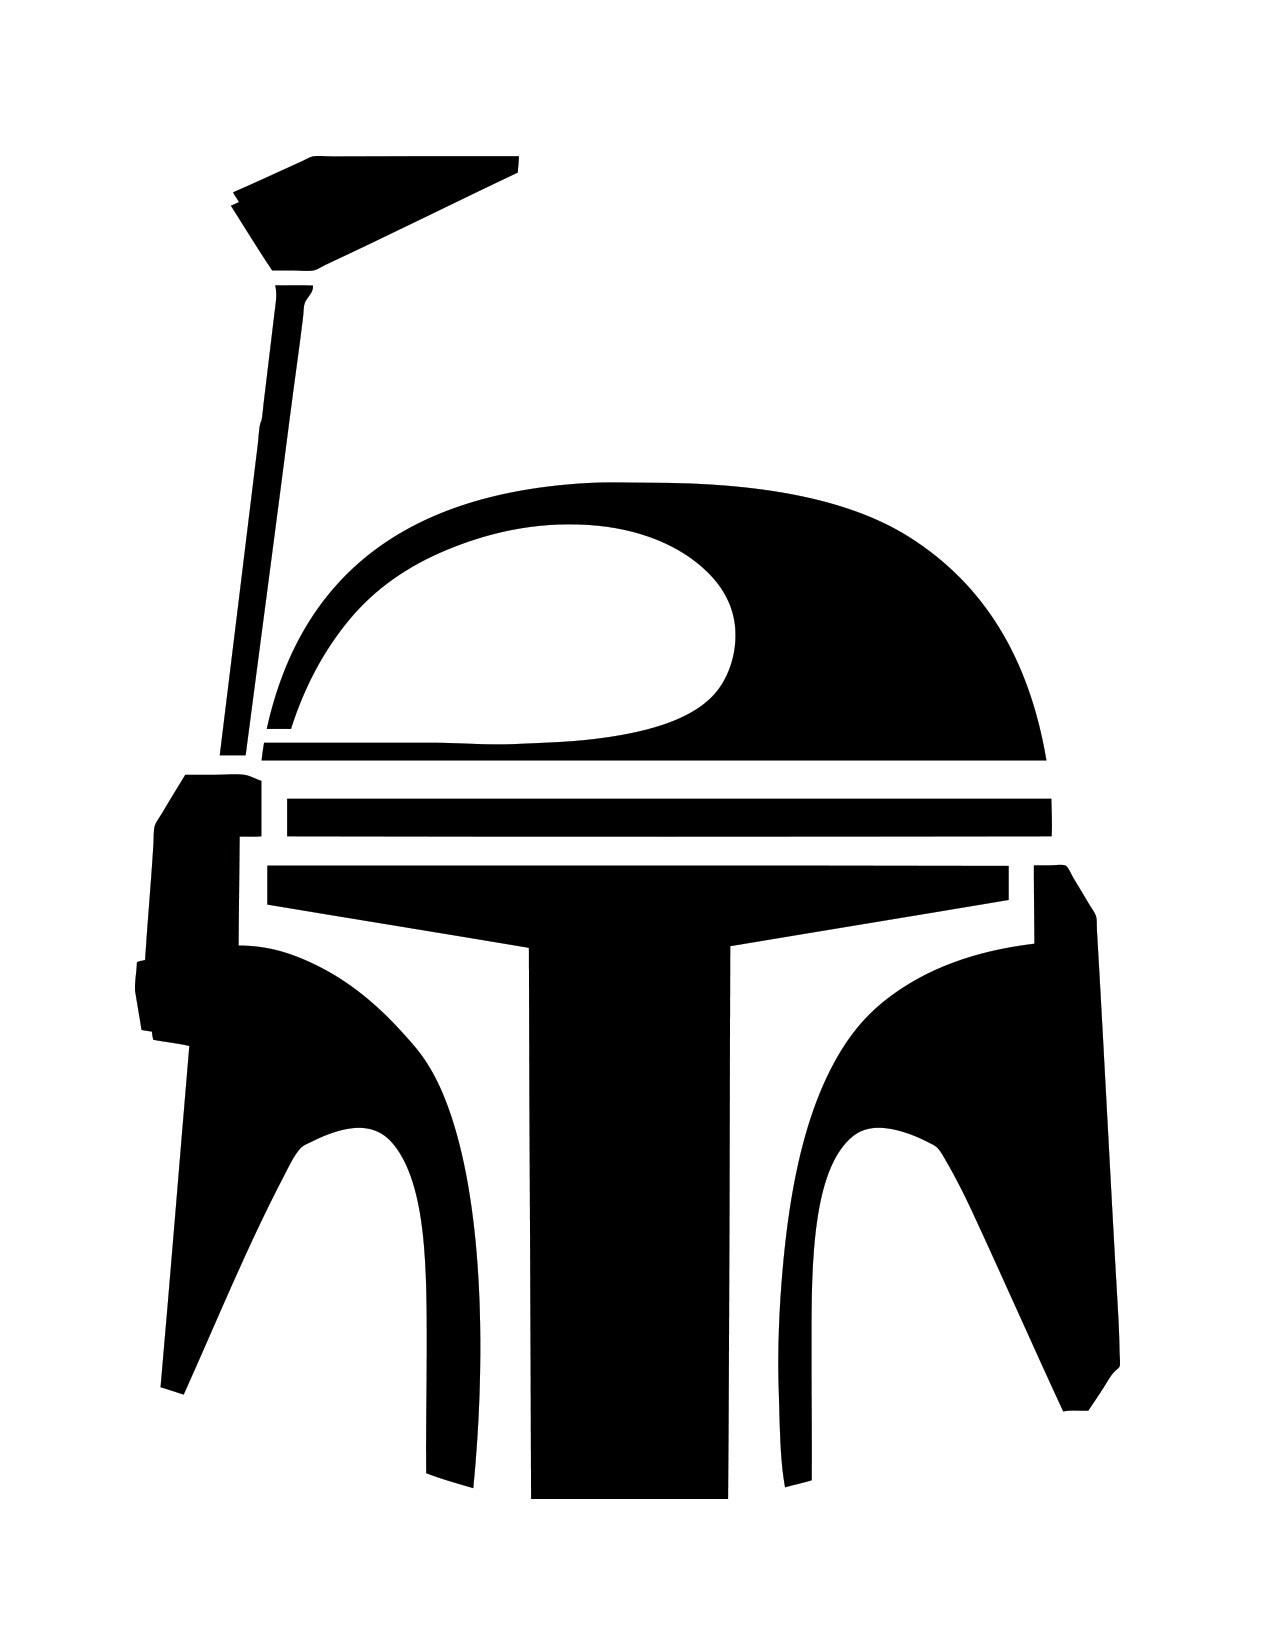 A Mandalorian helmet in a minimalist black-and-white style.